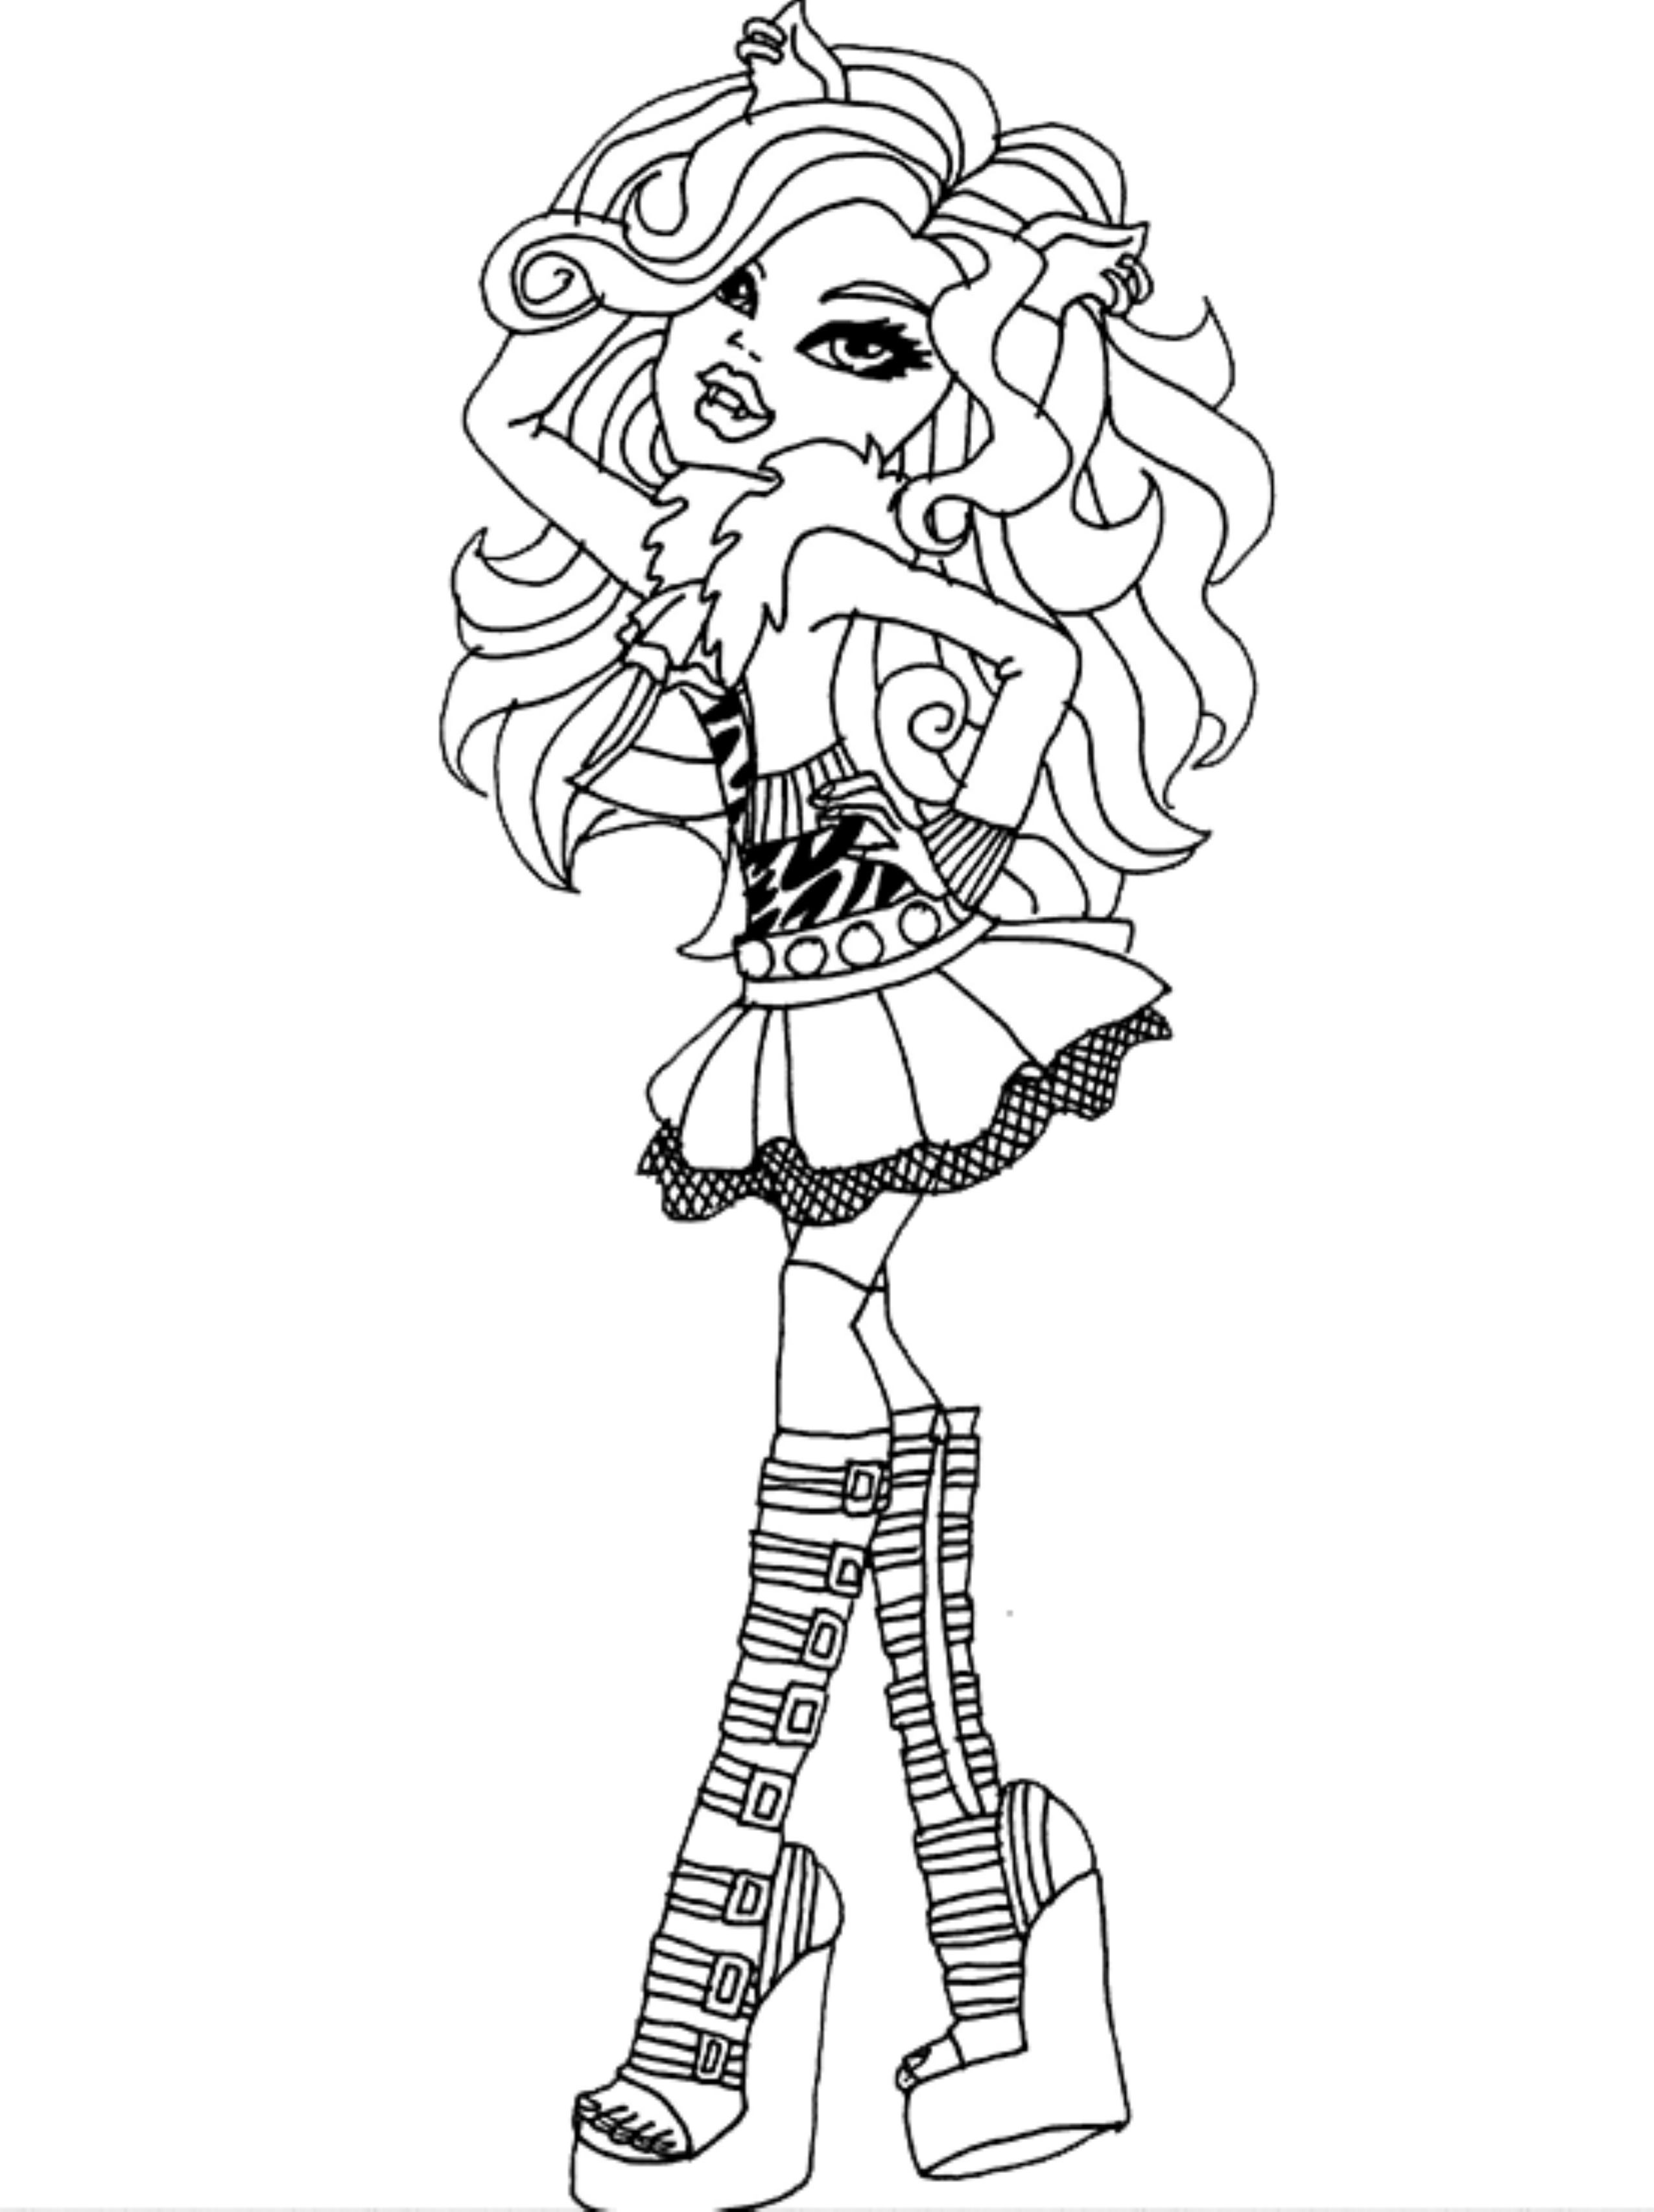 Monster High Elissabat Coloring Pages at GetDrawings | Free download